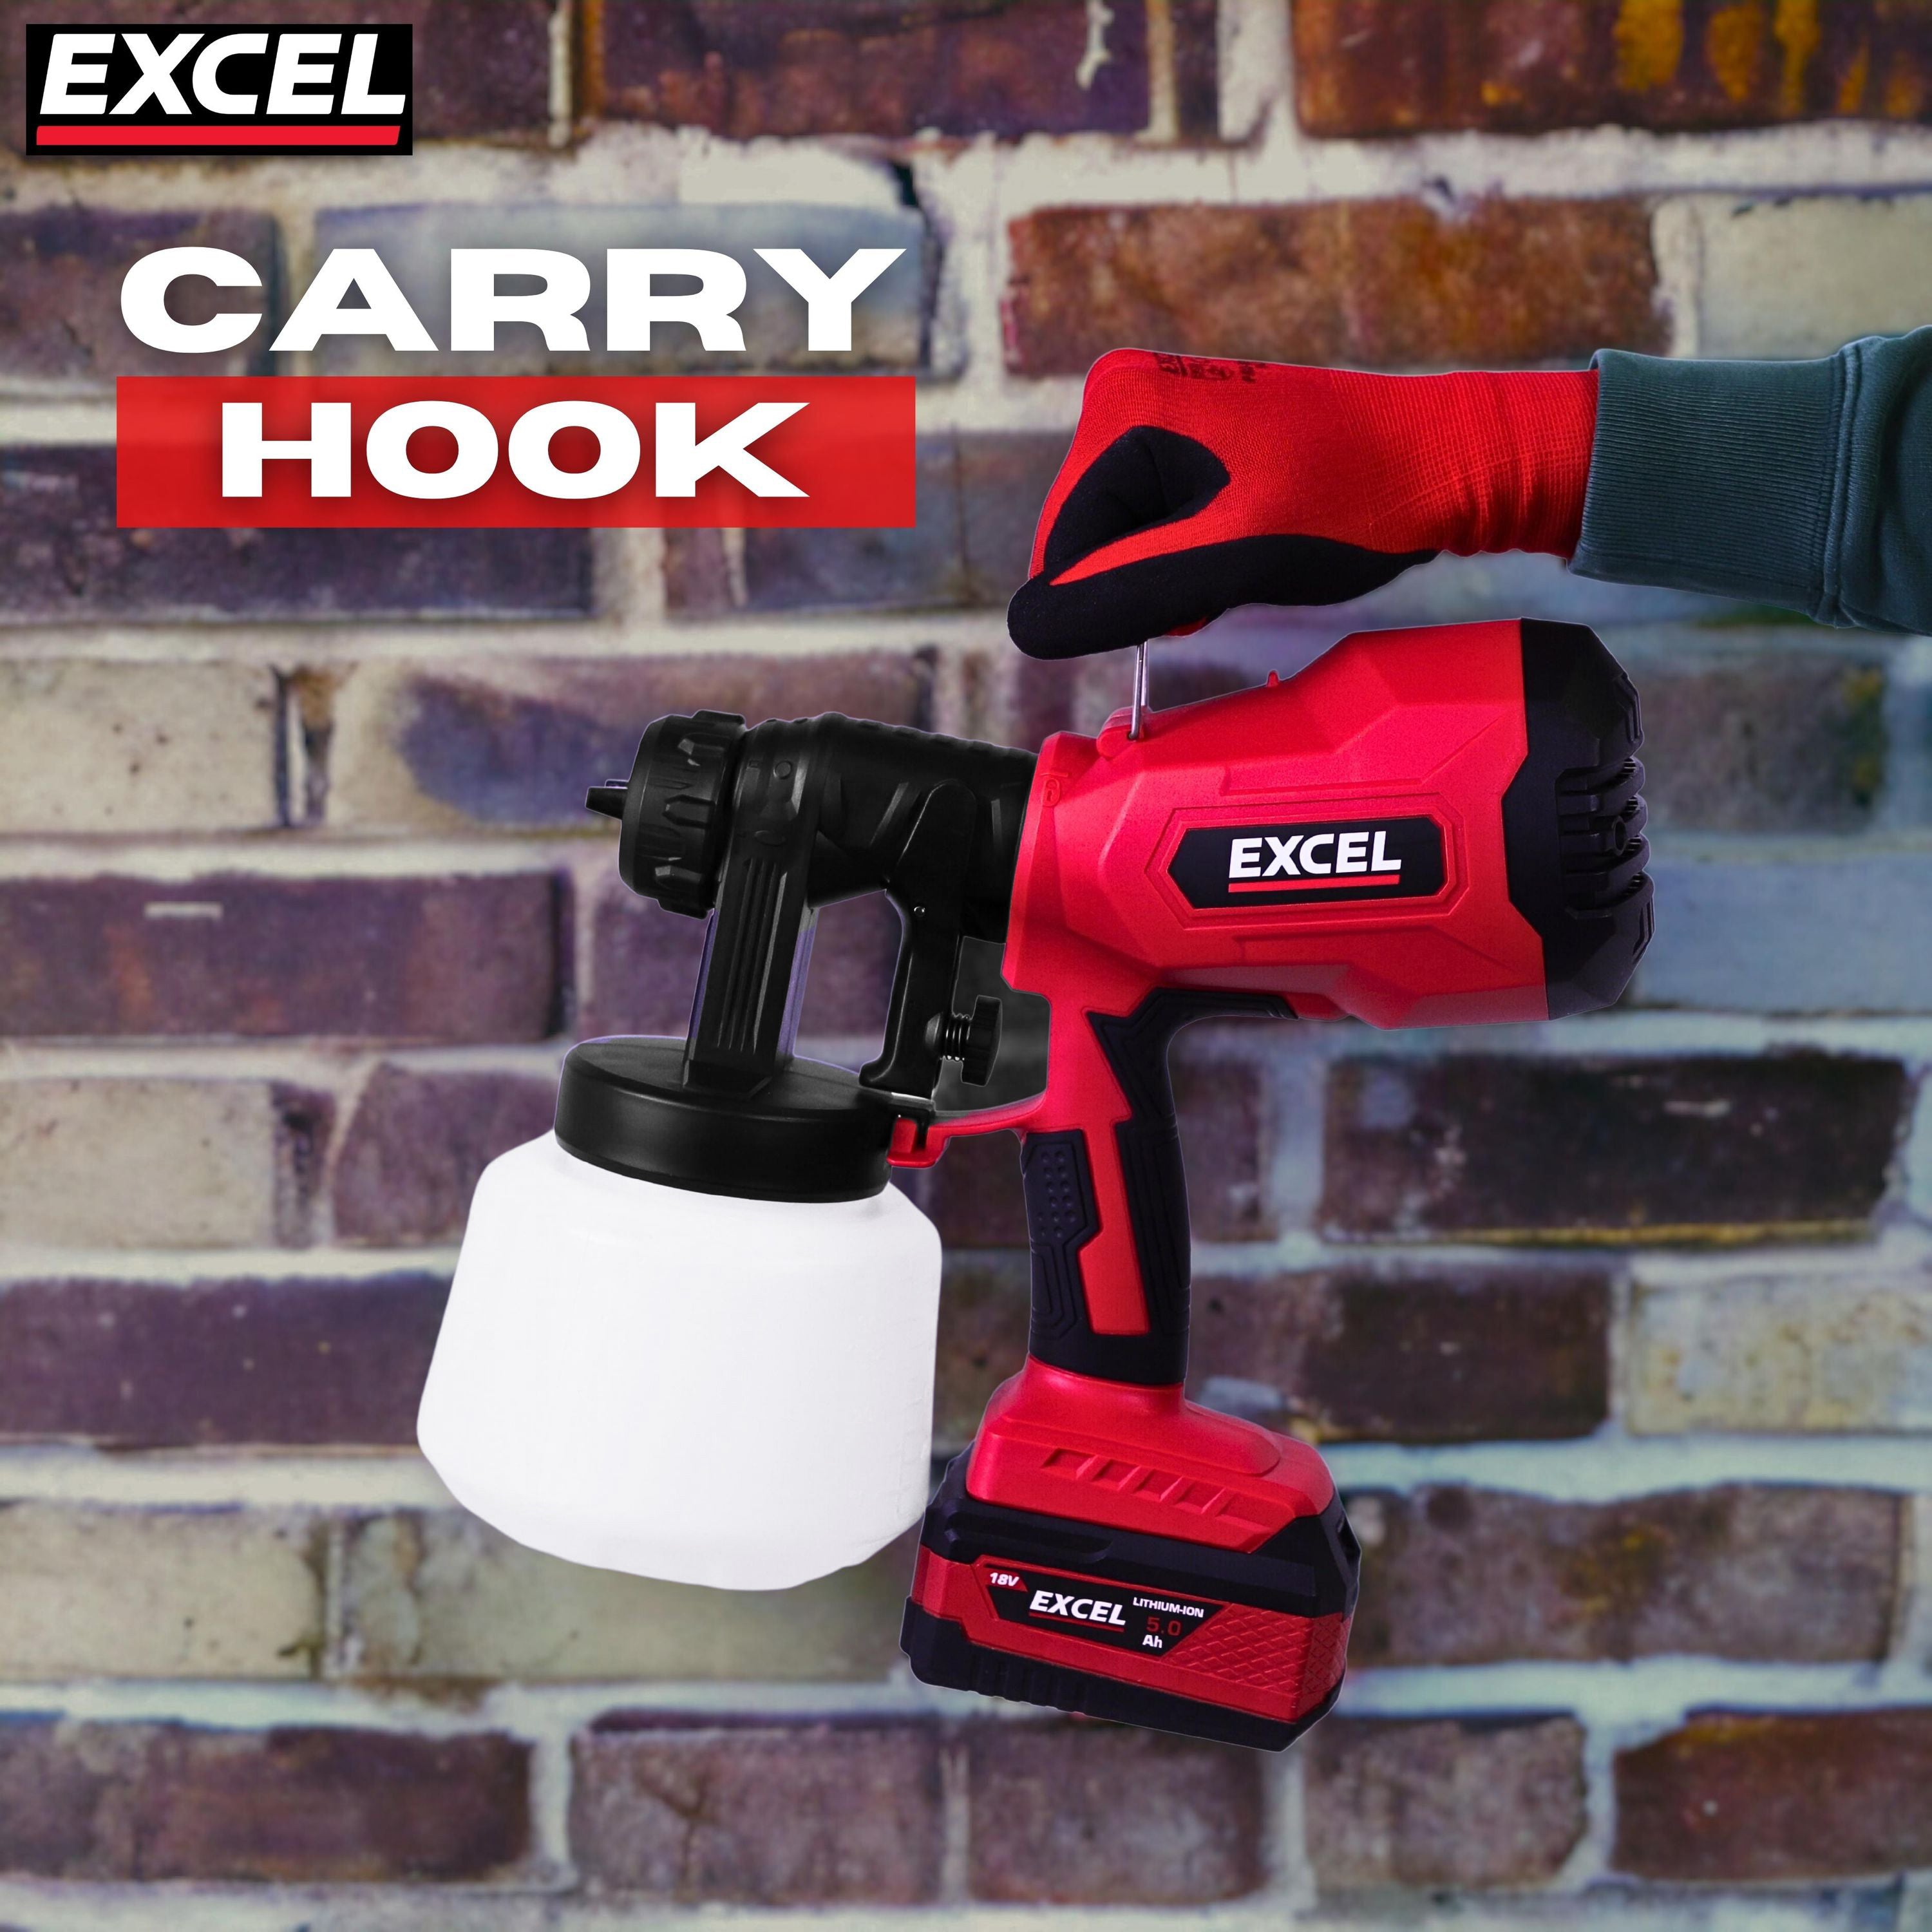 Excel 18V Cordless 1000ml Spray Gun Body Only (Battery & Charger Not Included)